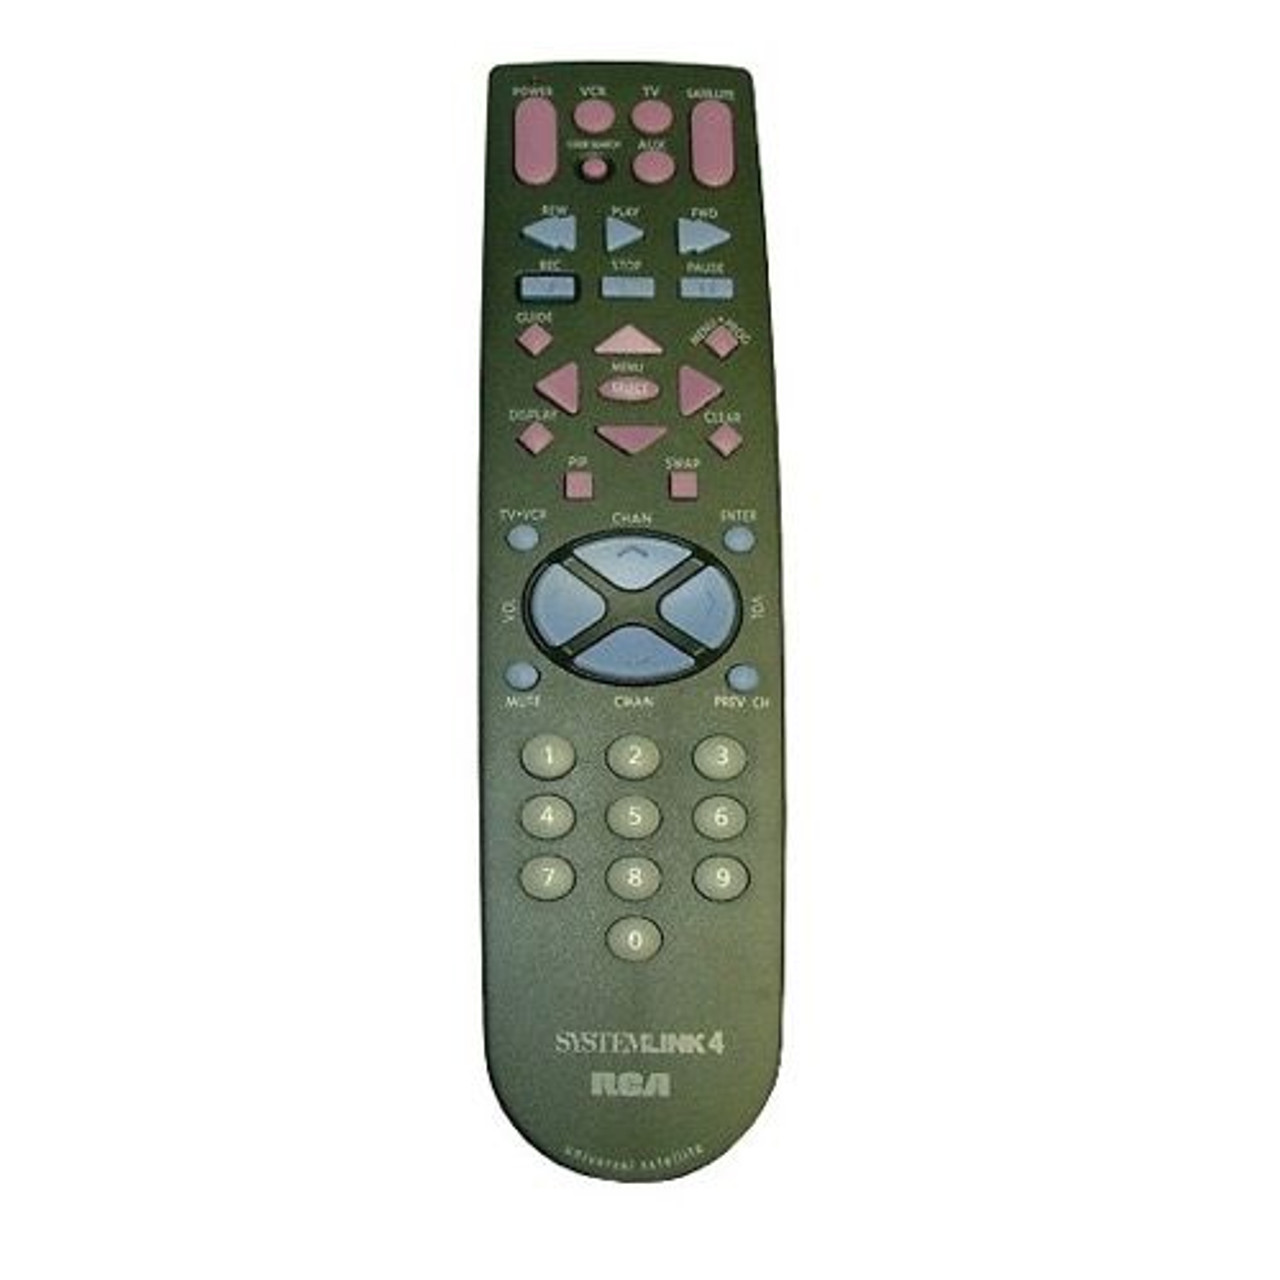 RCA RCU400 Universal Remote Control TV Systemlink 4 Device Satellite Receiver Digital Cable DIRECTV Dish Net Replacement Remote Control, Part # RCSAT1-A